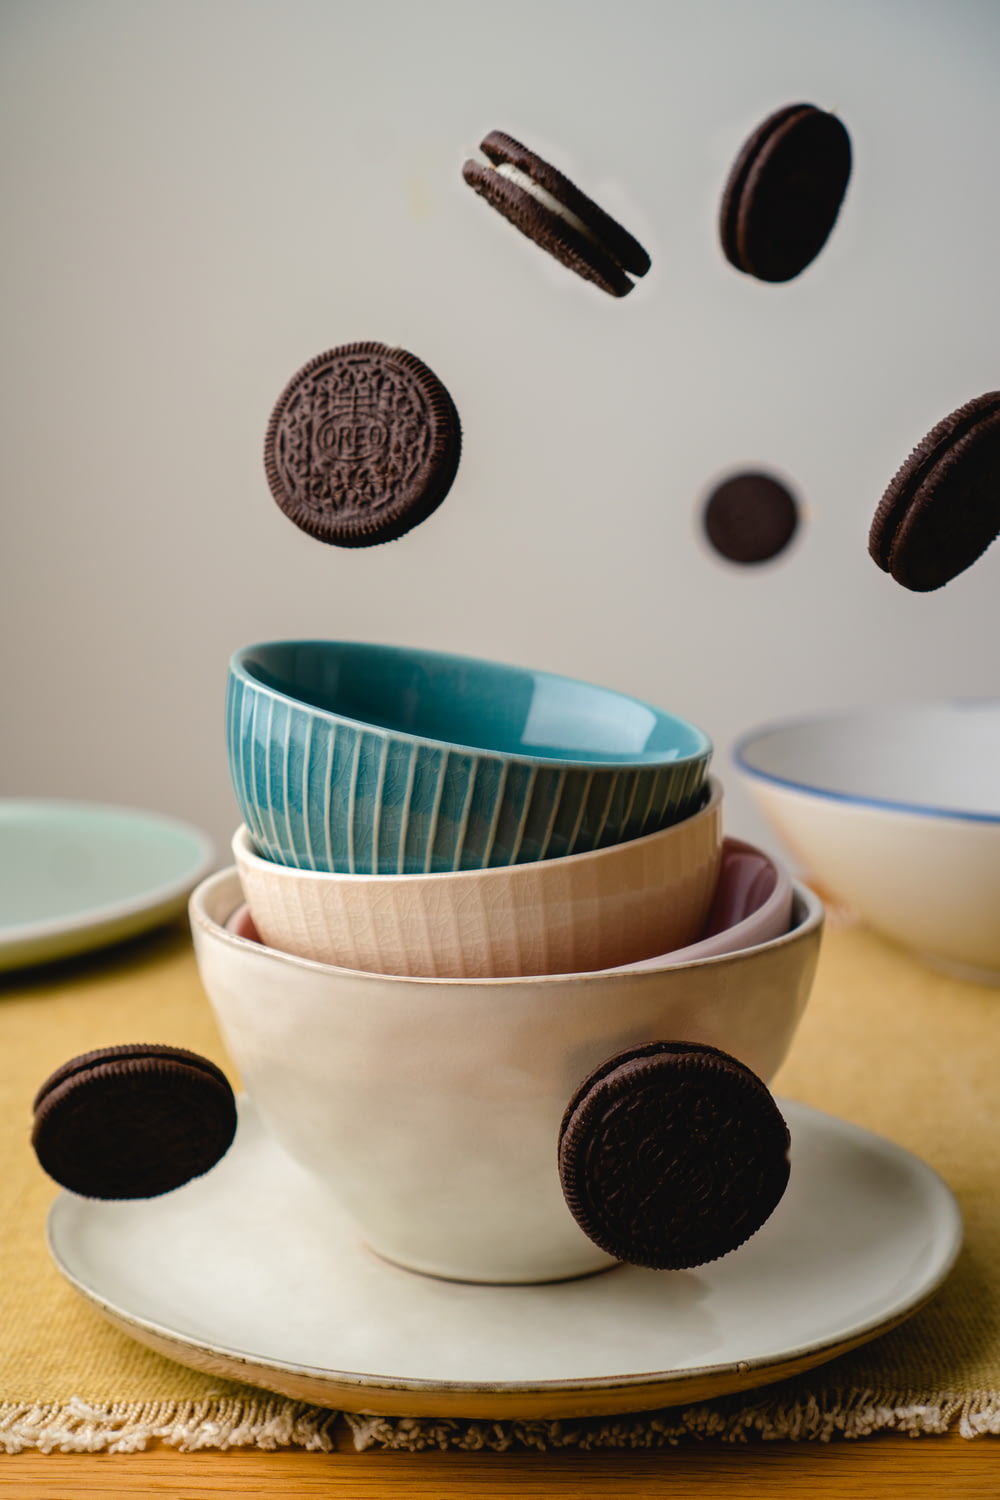 a table topped with plates and bowls filled with cookies